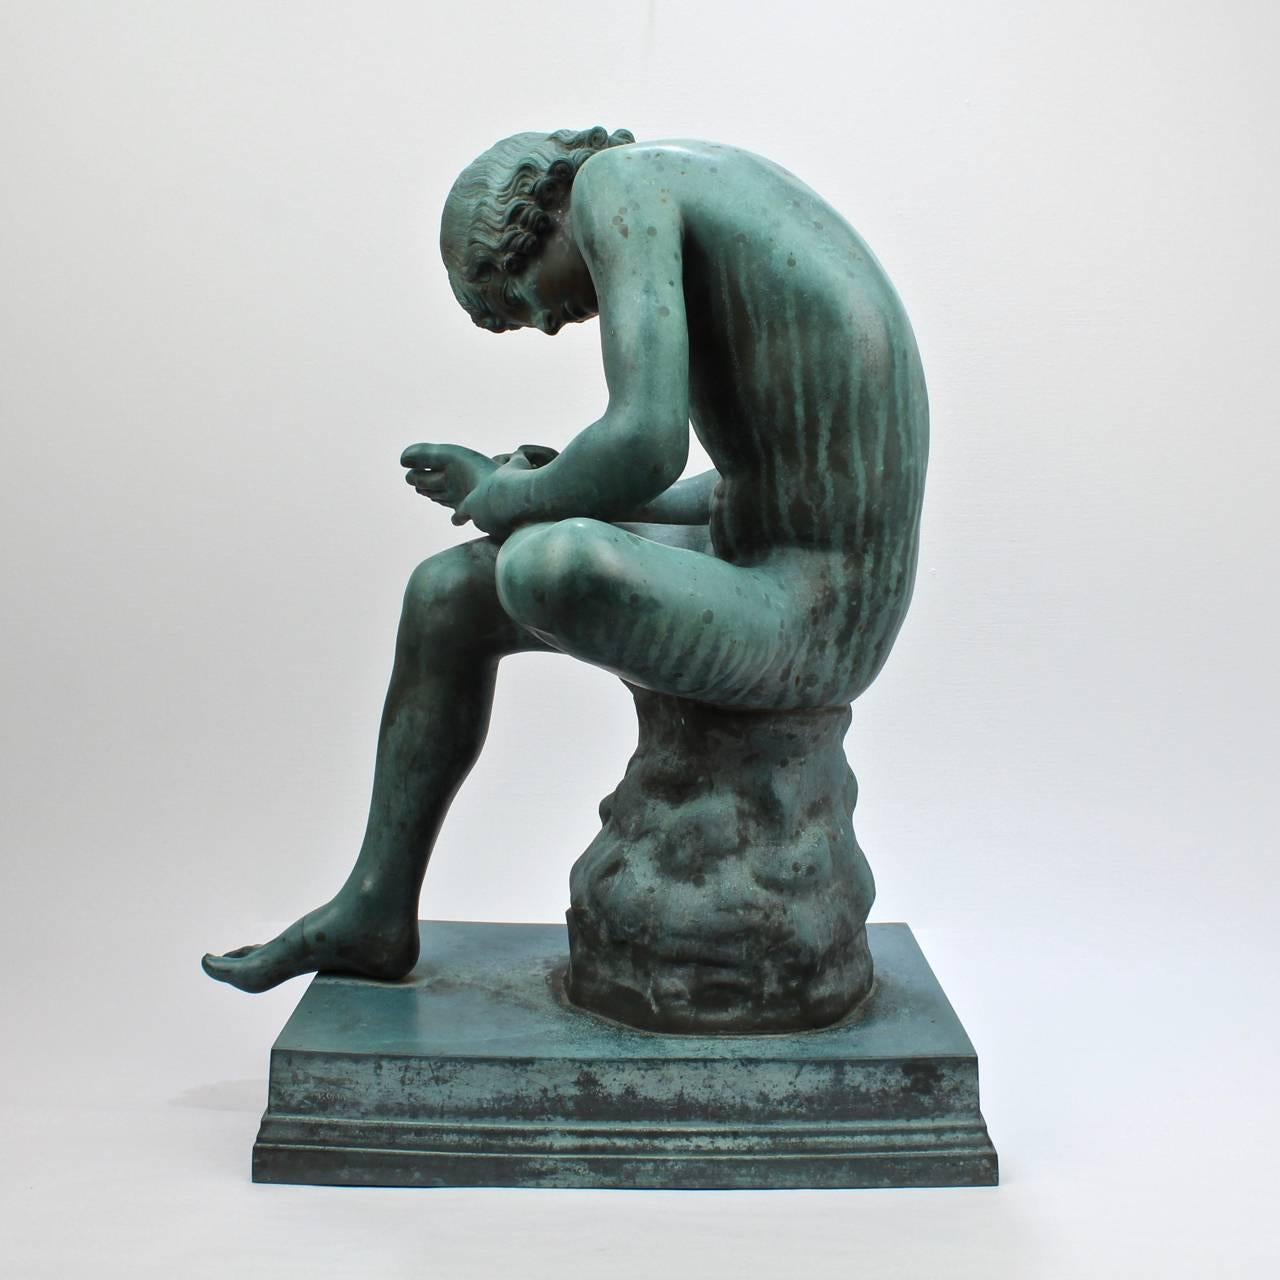 A large-scale and very finely modeled Grand Tour bronze sculpture after the Greco-Roman model of "Spinario" or the "Boy with Thorn" by Benedetto Boschetti.

With a stunningly beautiful weathered verdigris patina. (This bronze